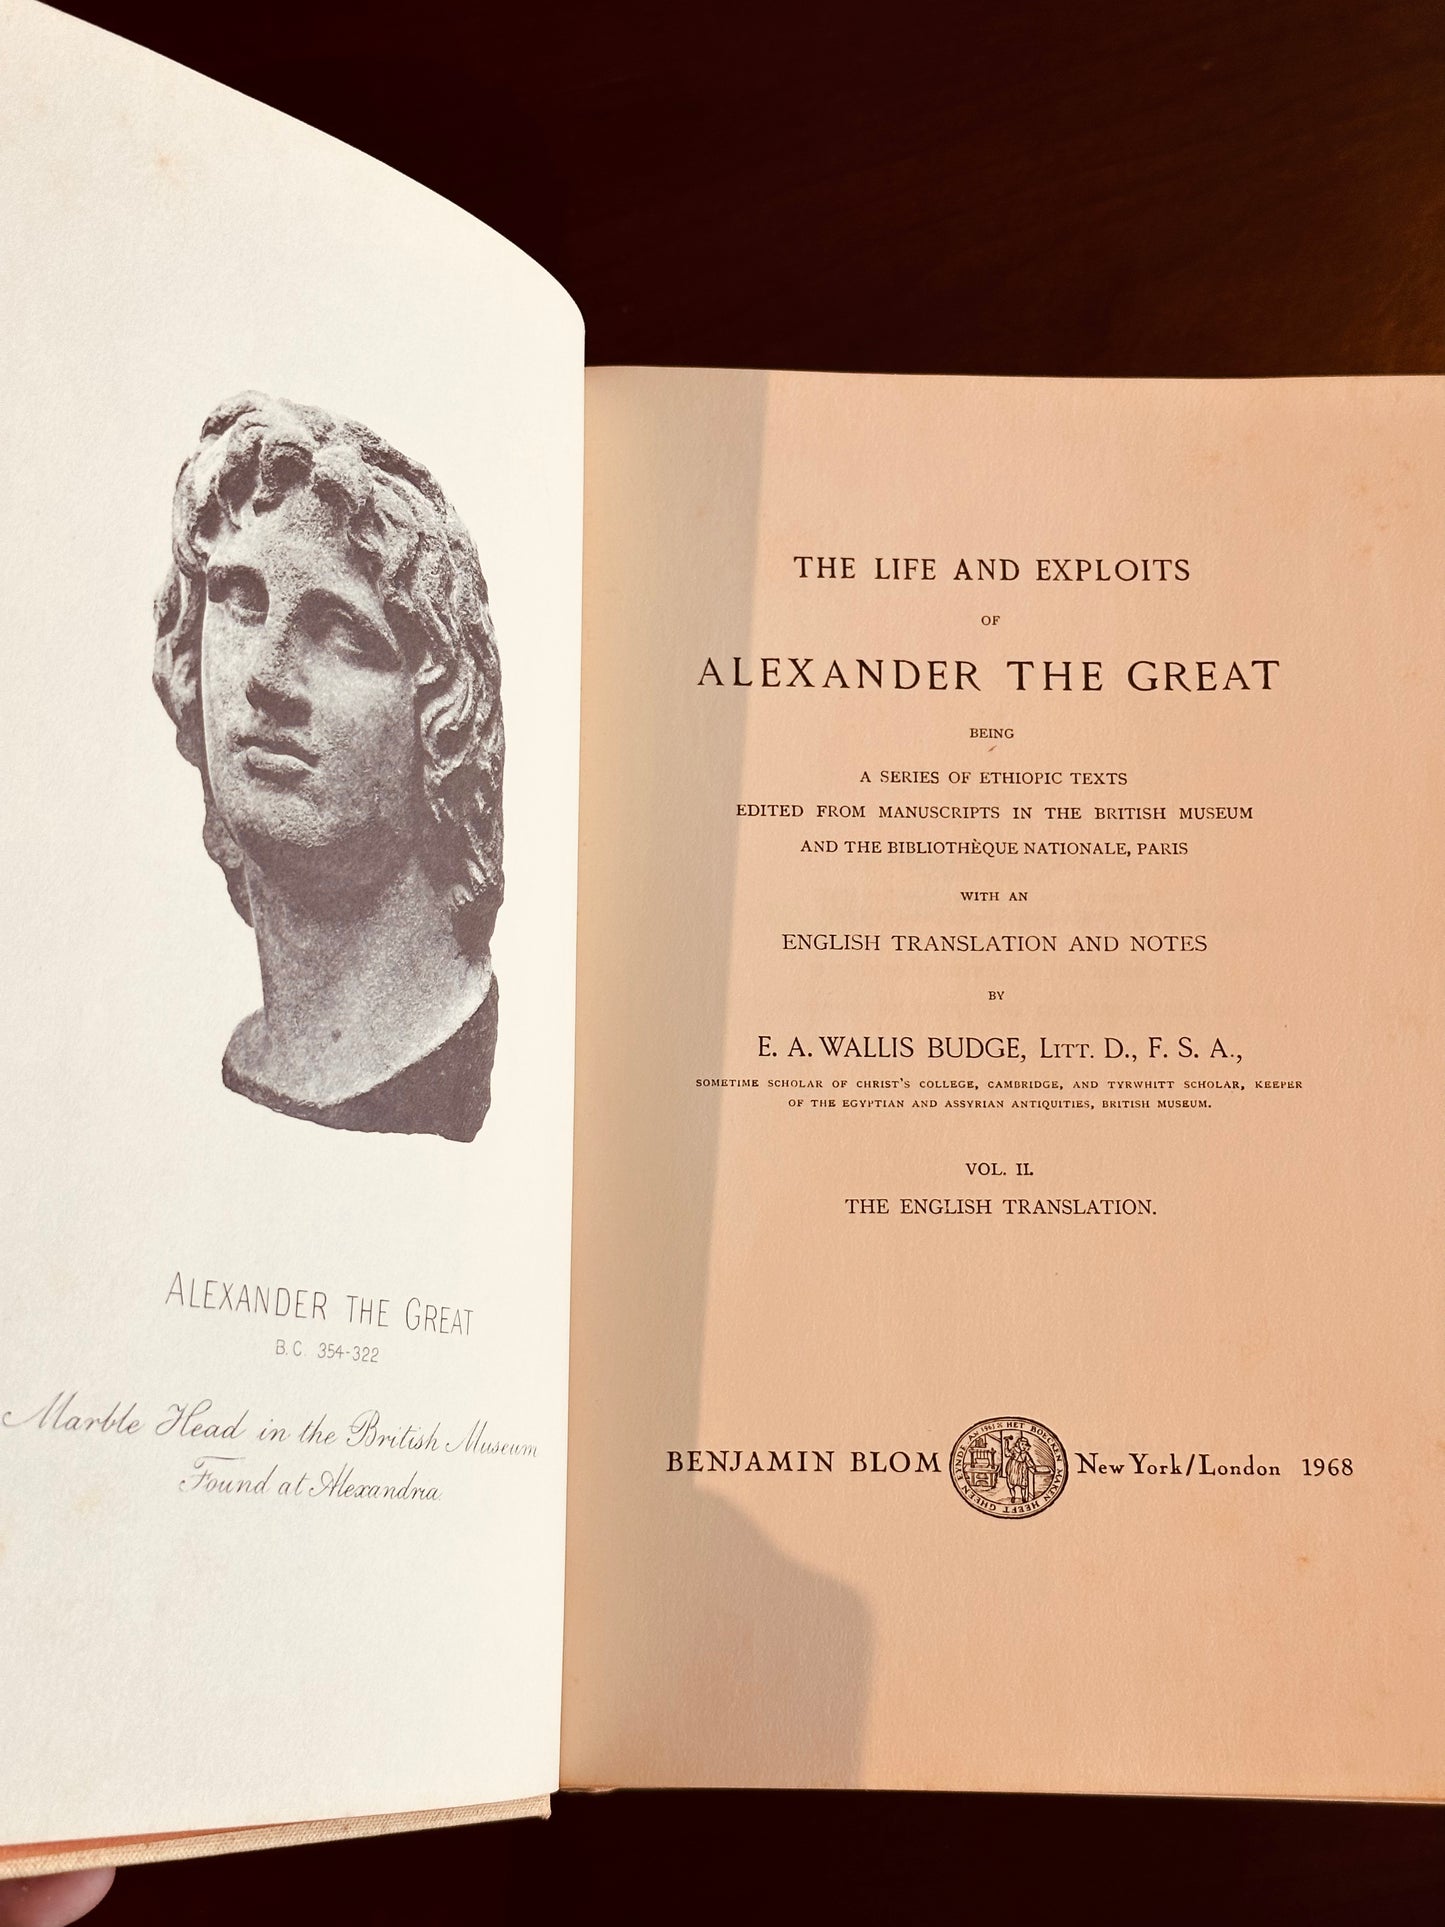 The Life and Exploits of Alexander The Great by Sir E.A. Wallis Budge